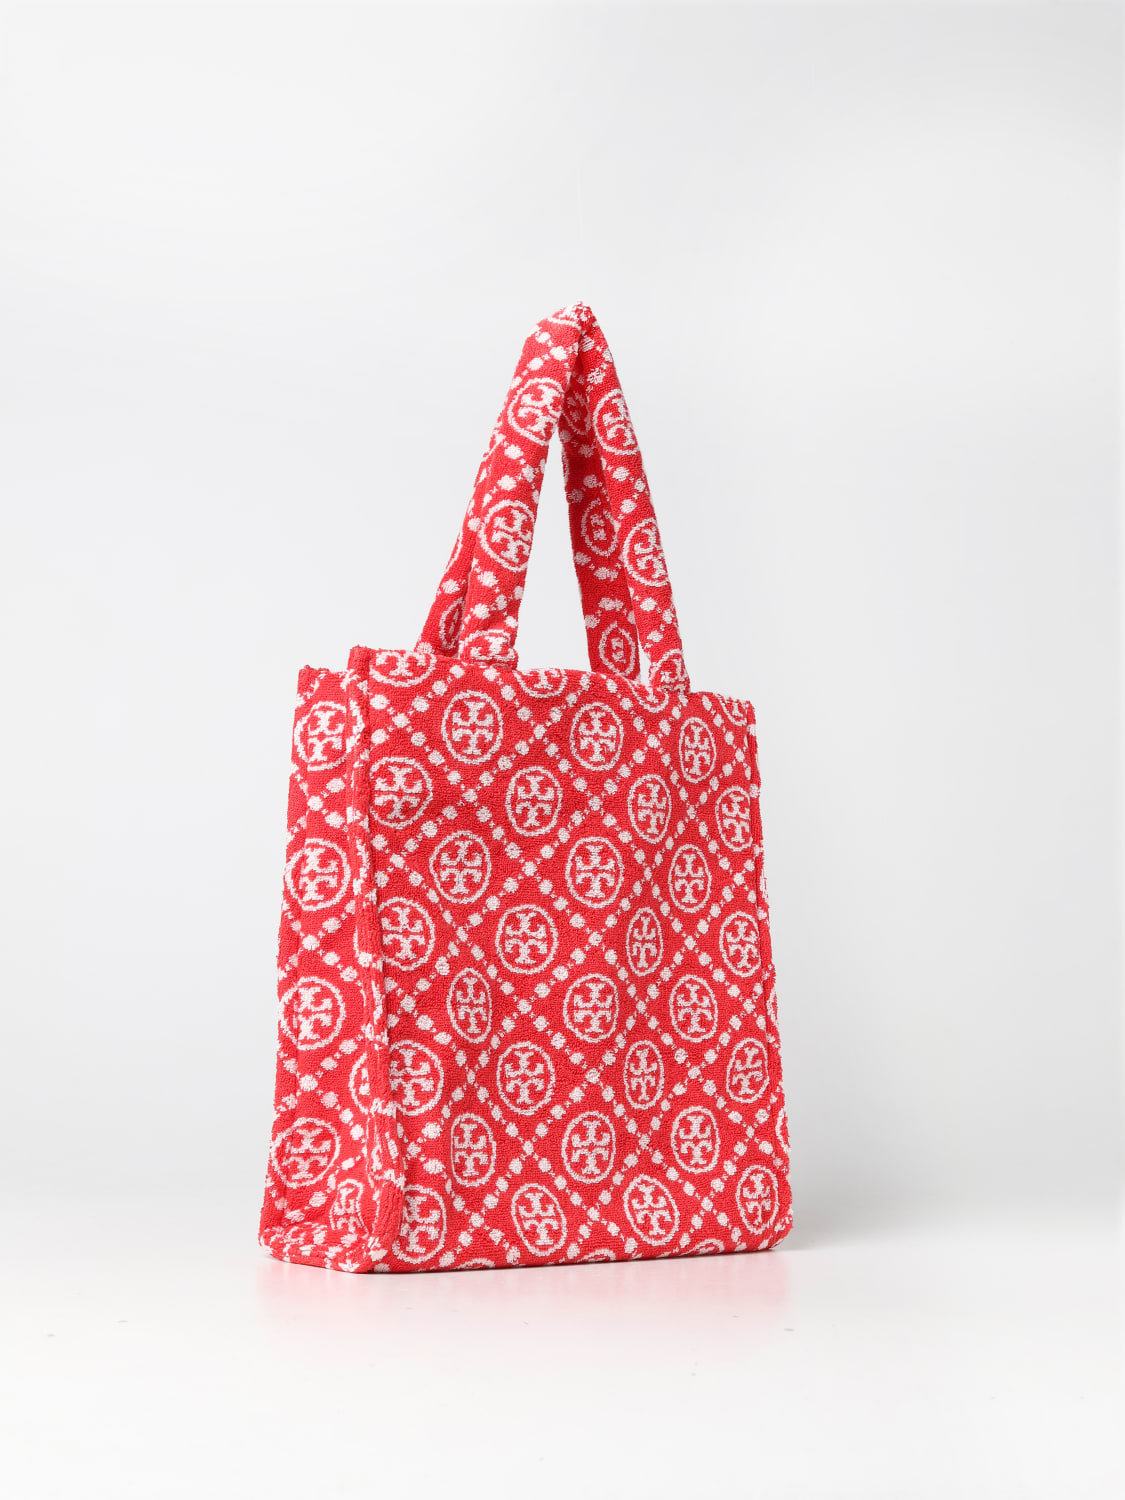 Women's Tote Bags - Red